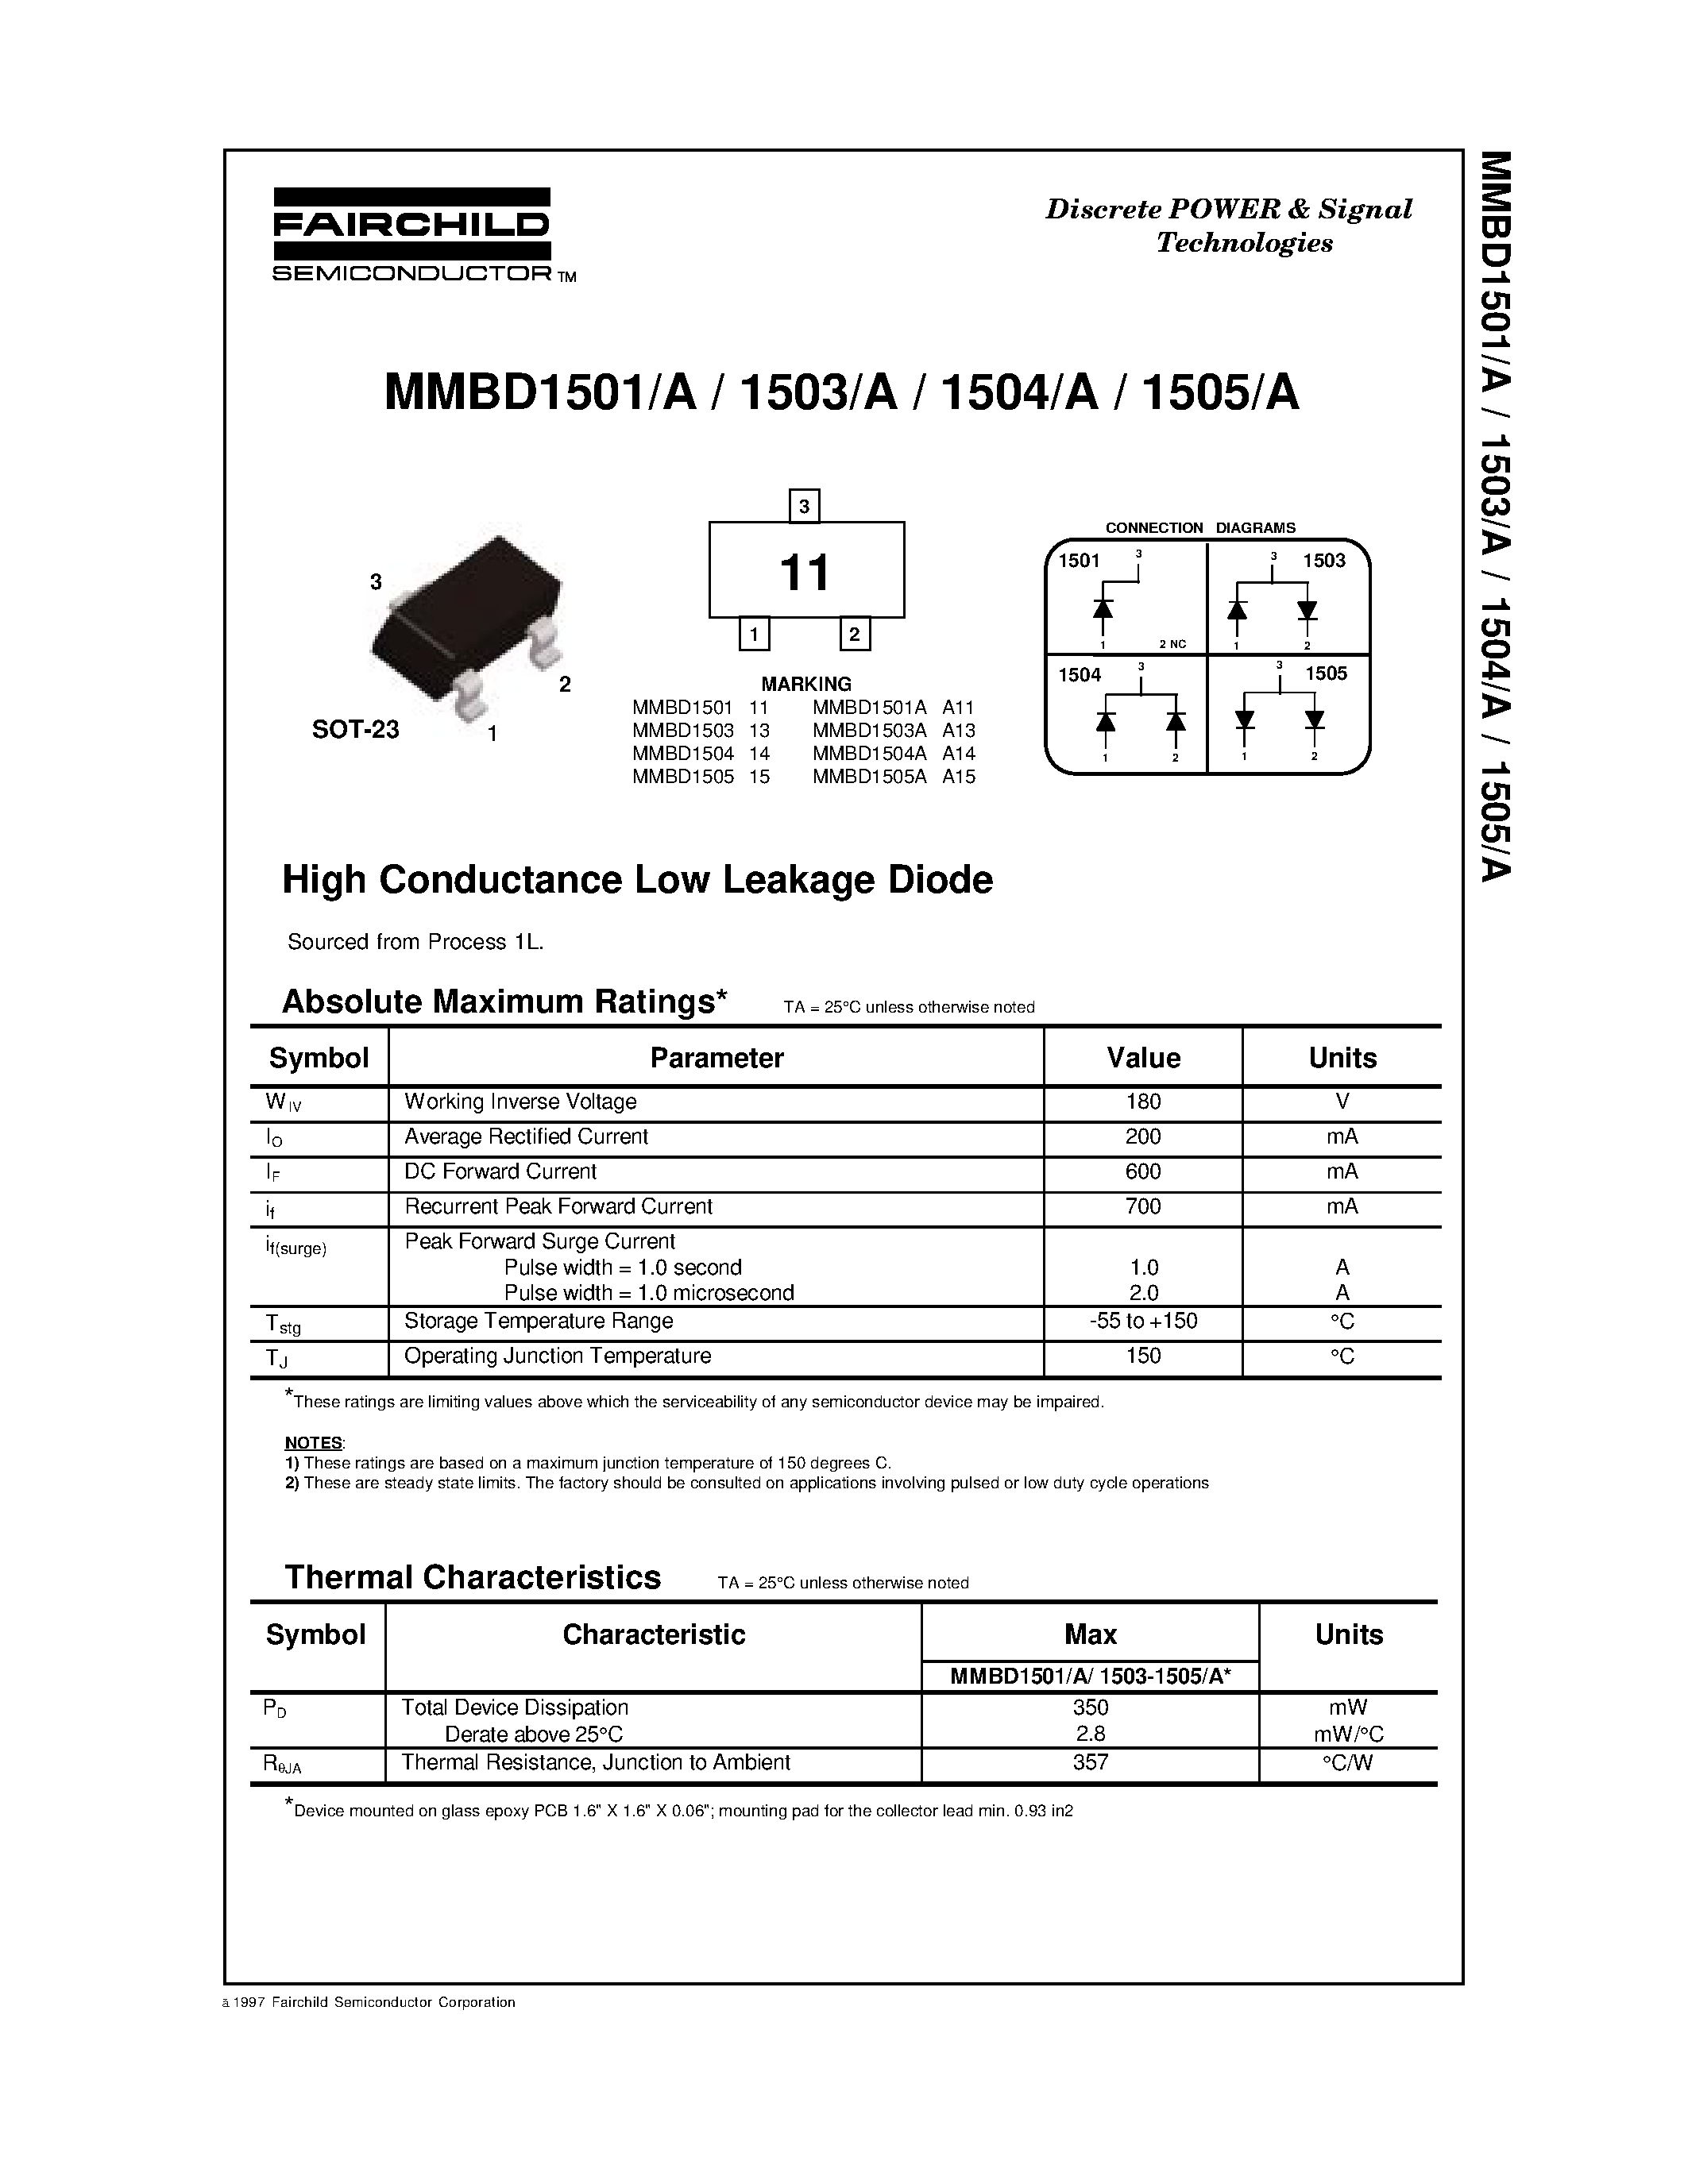 Даташит MMBD1501 - High Conductance Low Leakage Diode страница 1